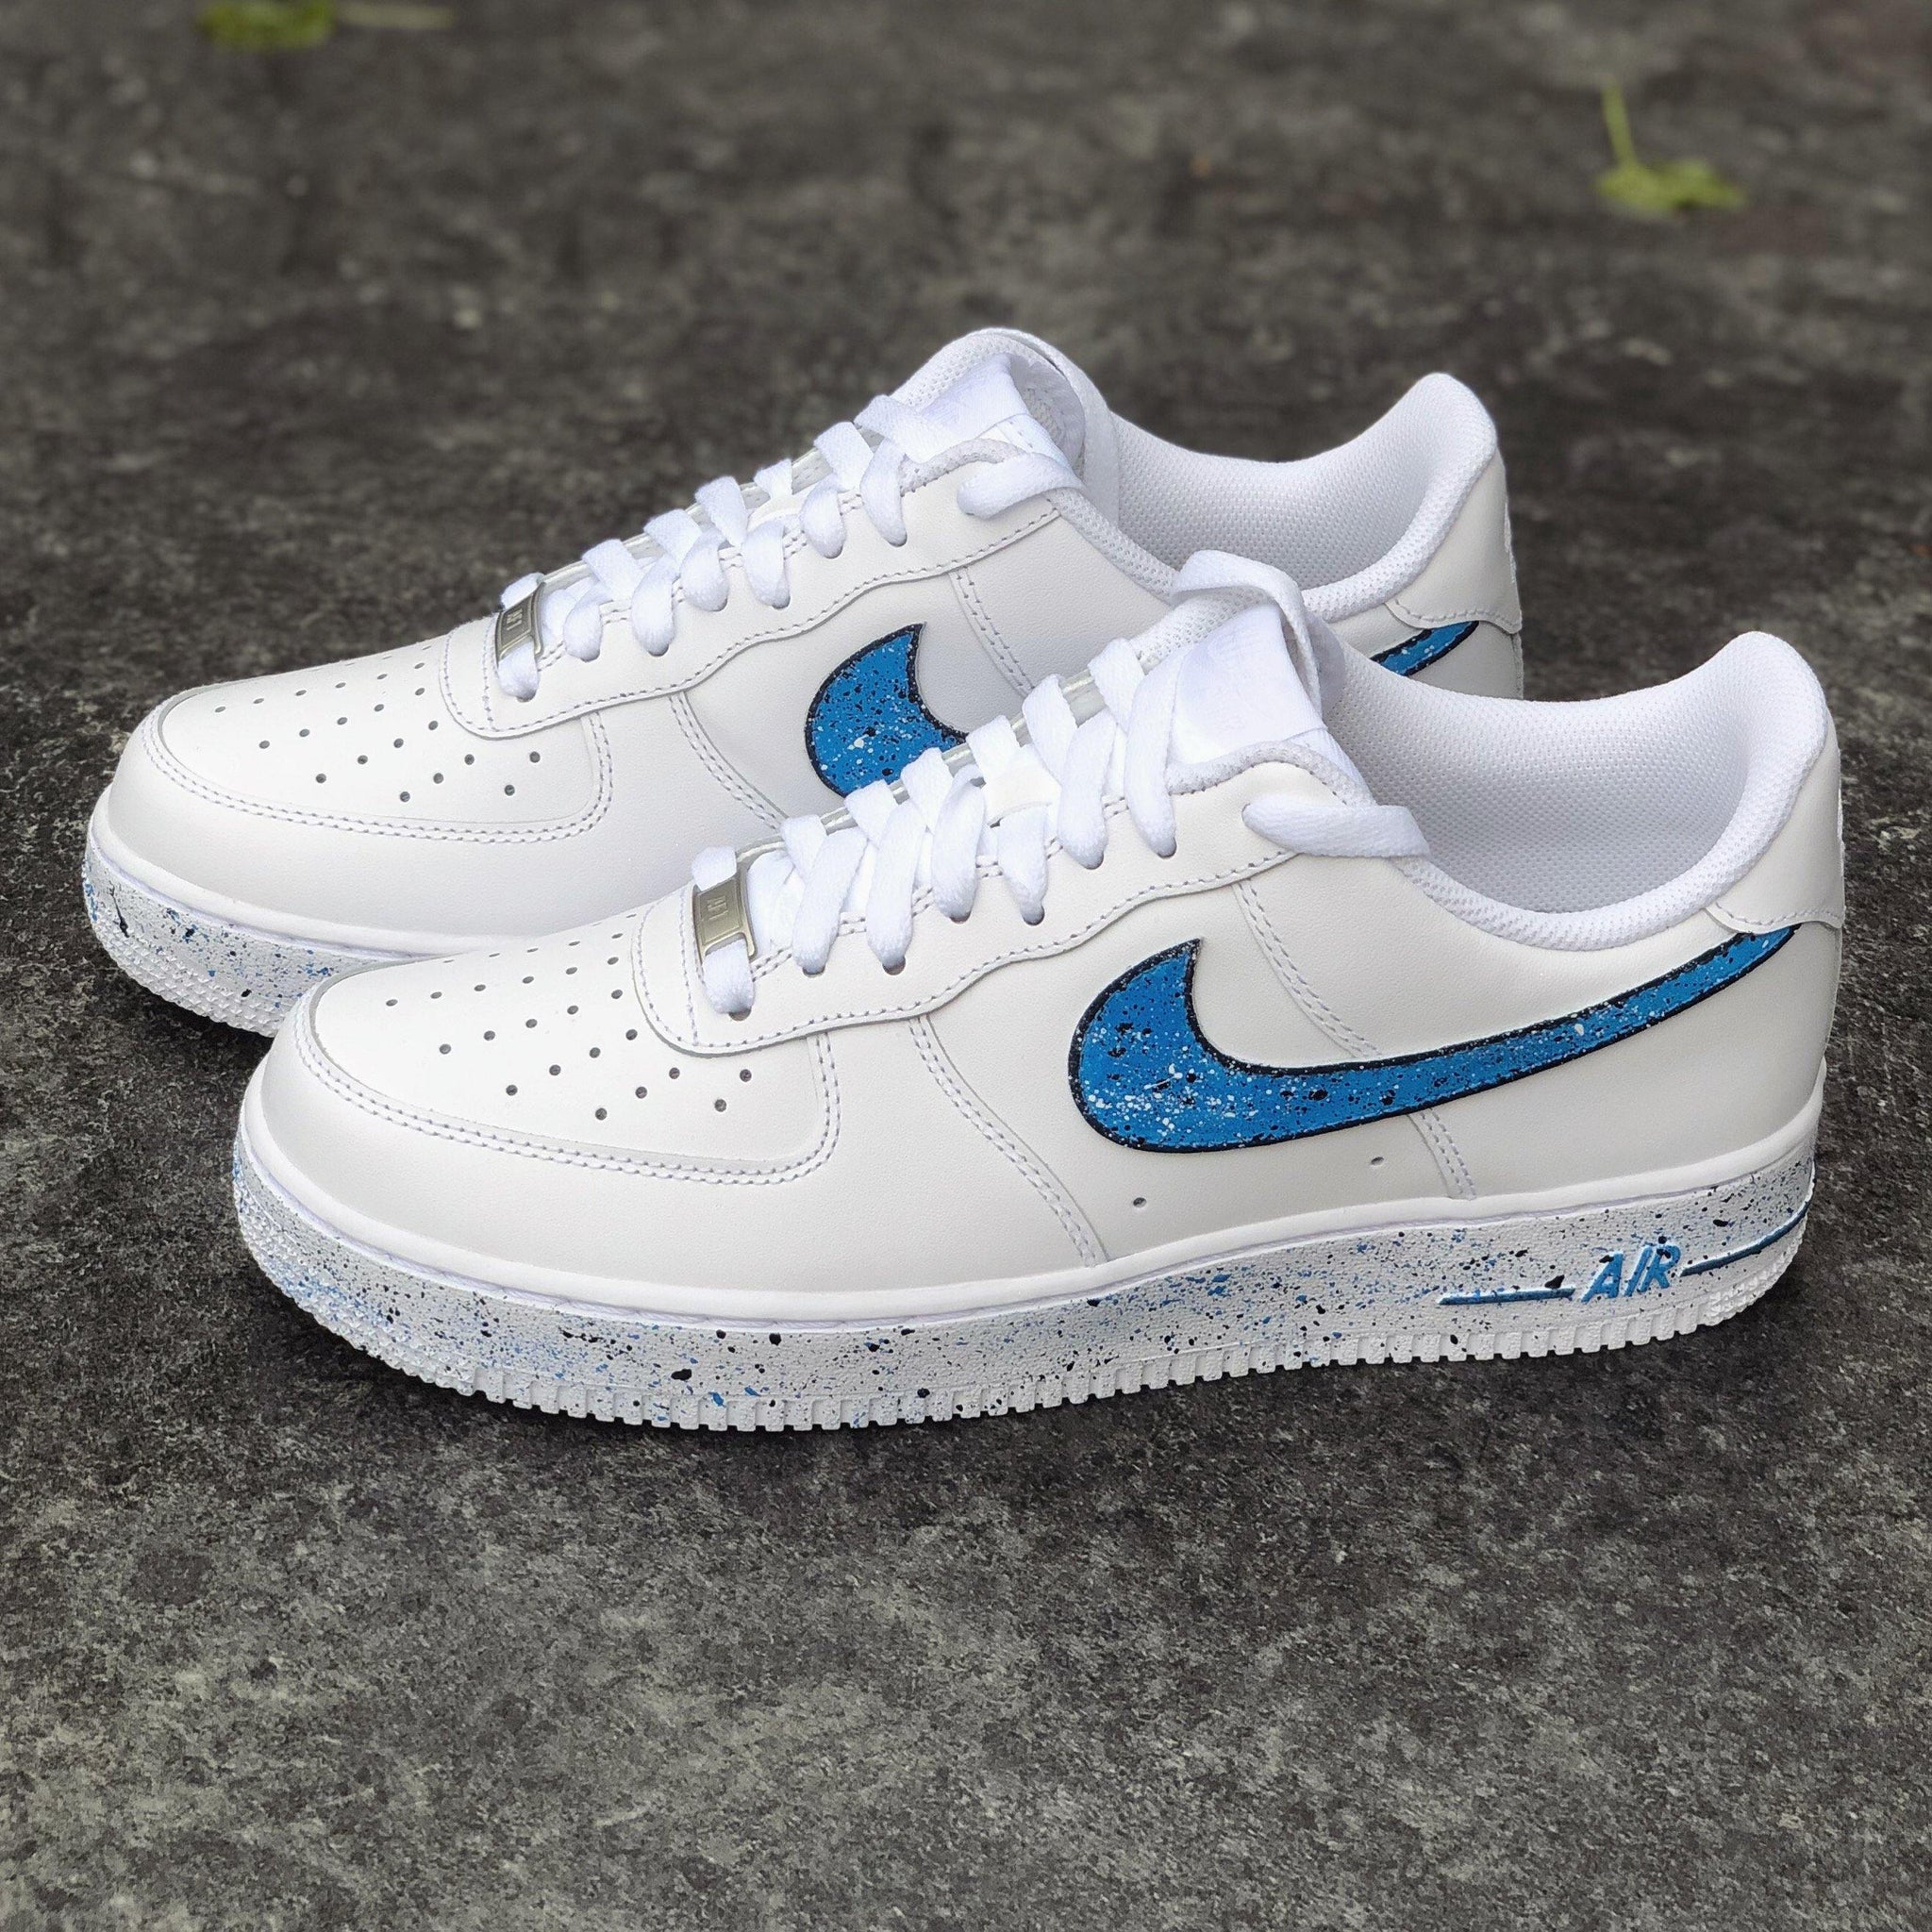 painted air force ones blue